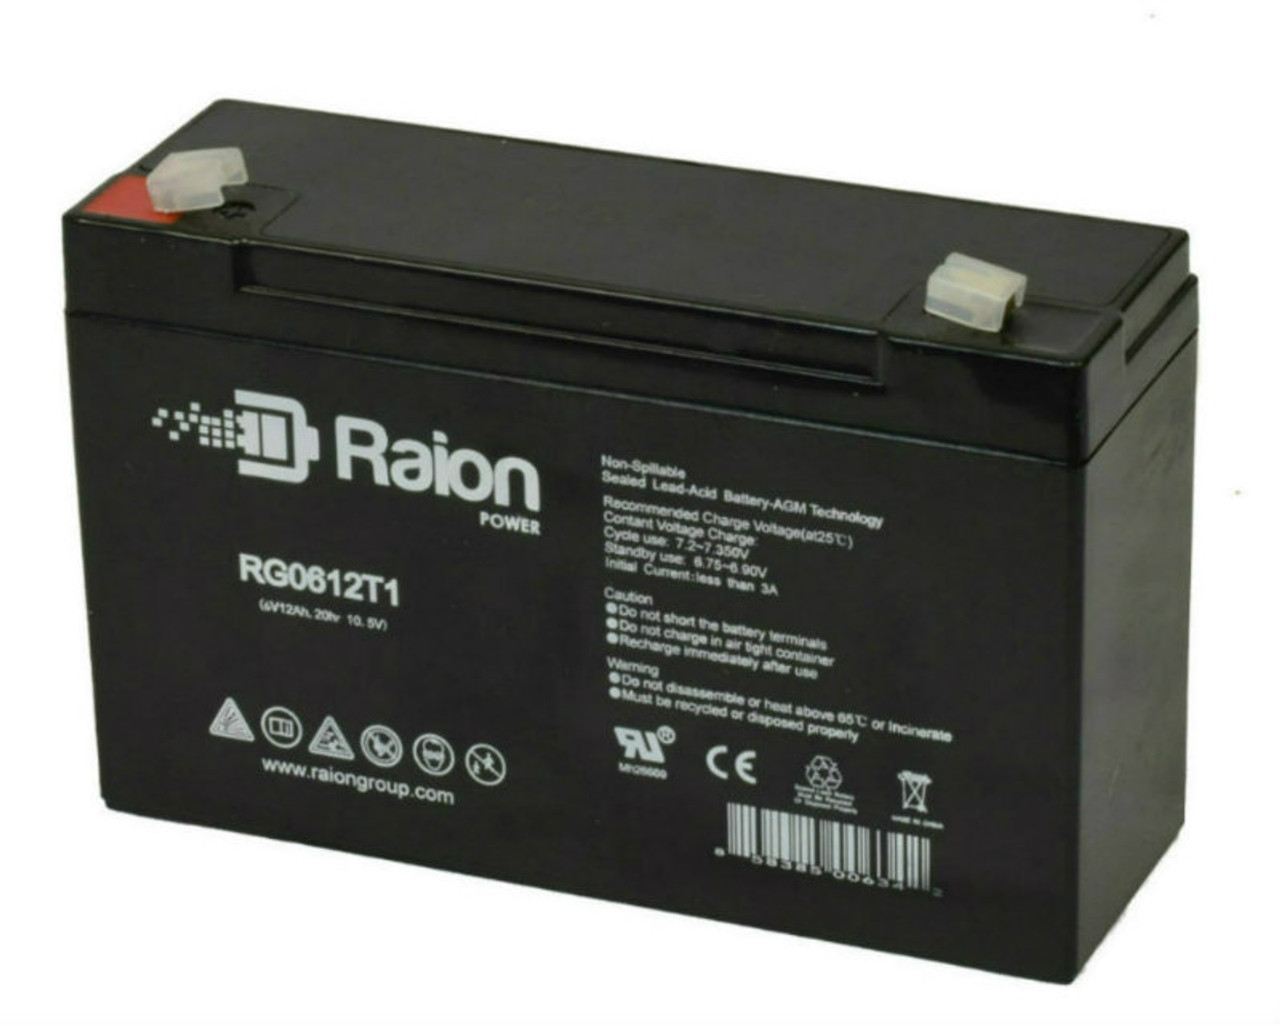 Raion Power RG06120T1 Replacement 6V 12Ah Emergency Light Battery for Dual Lite 12-727